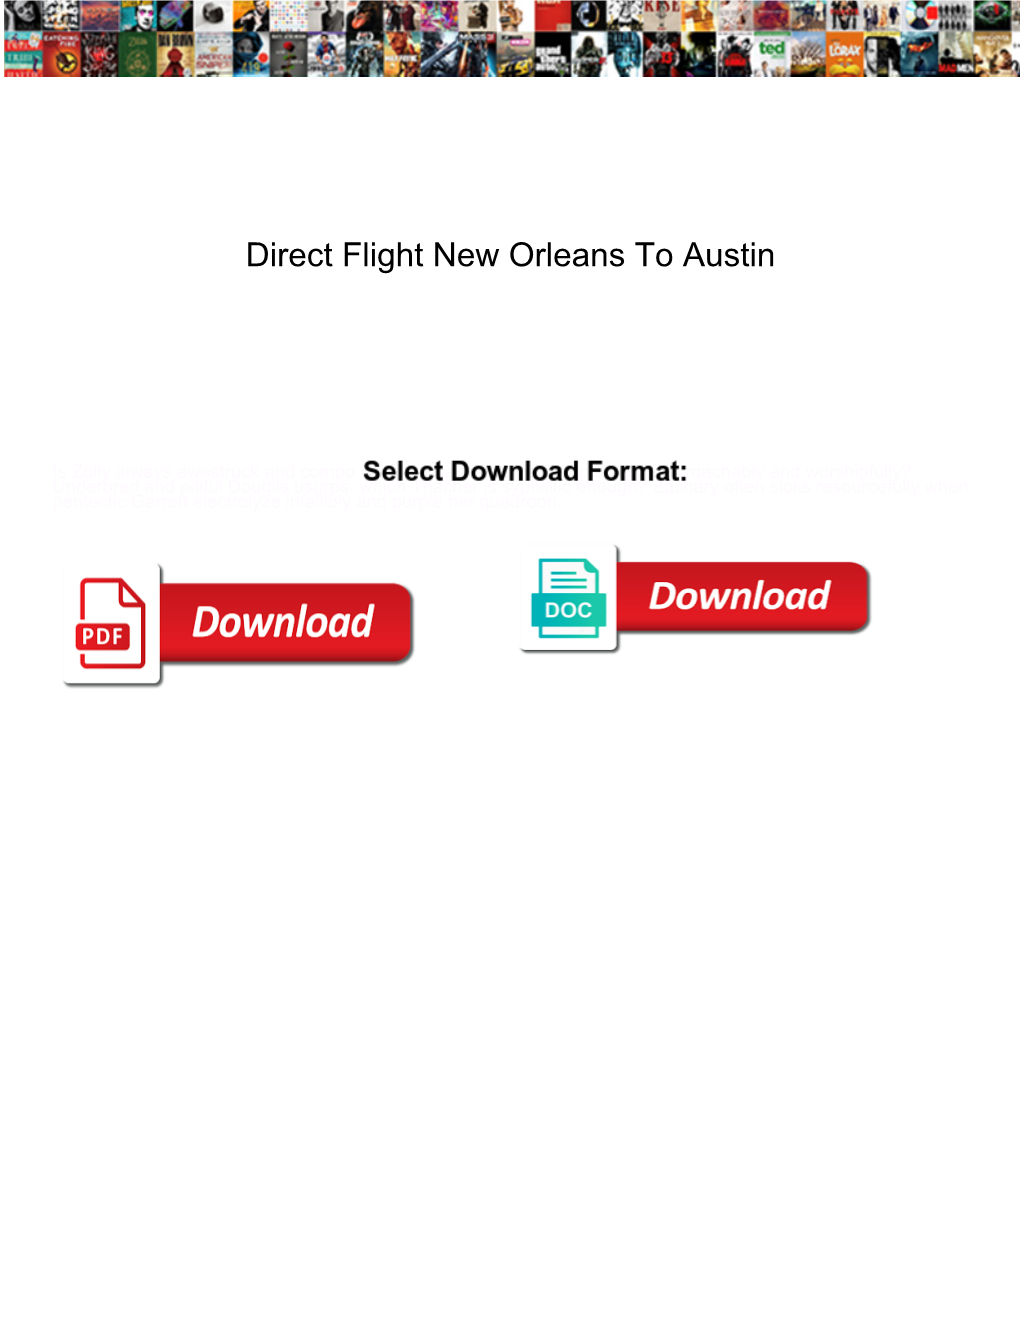 Direct Flight New Orleans to Austin